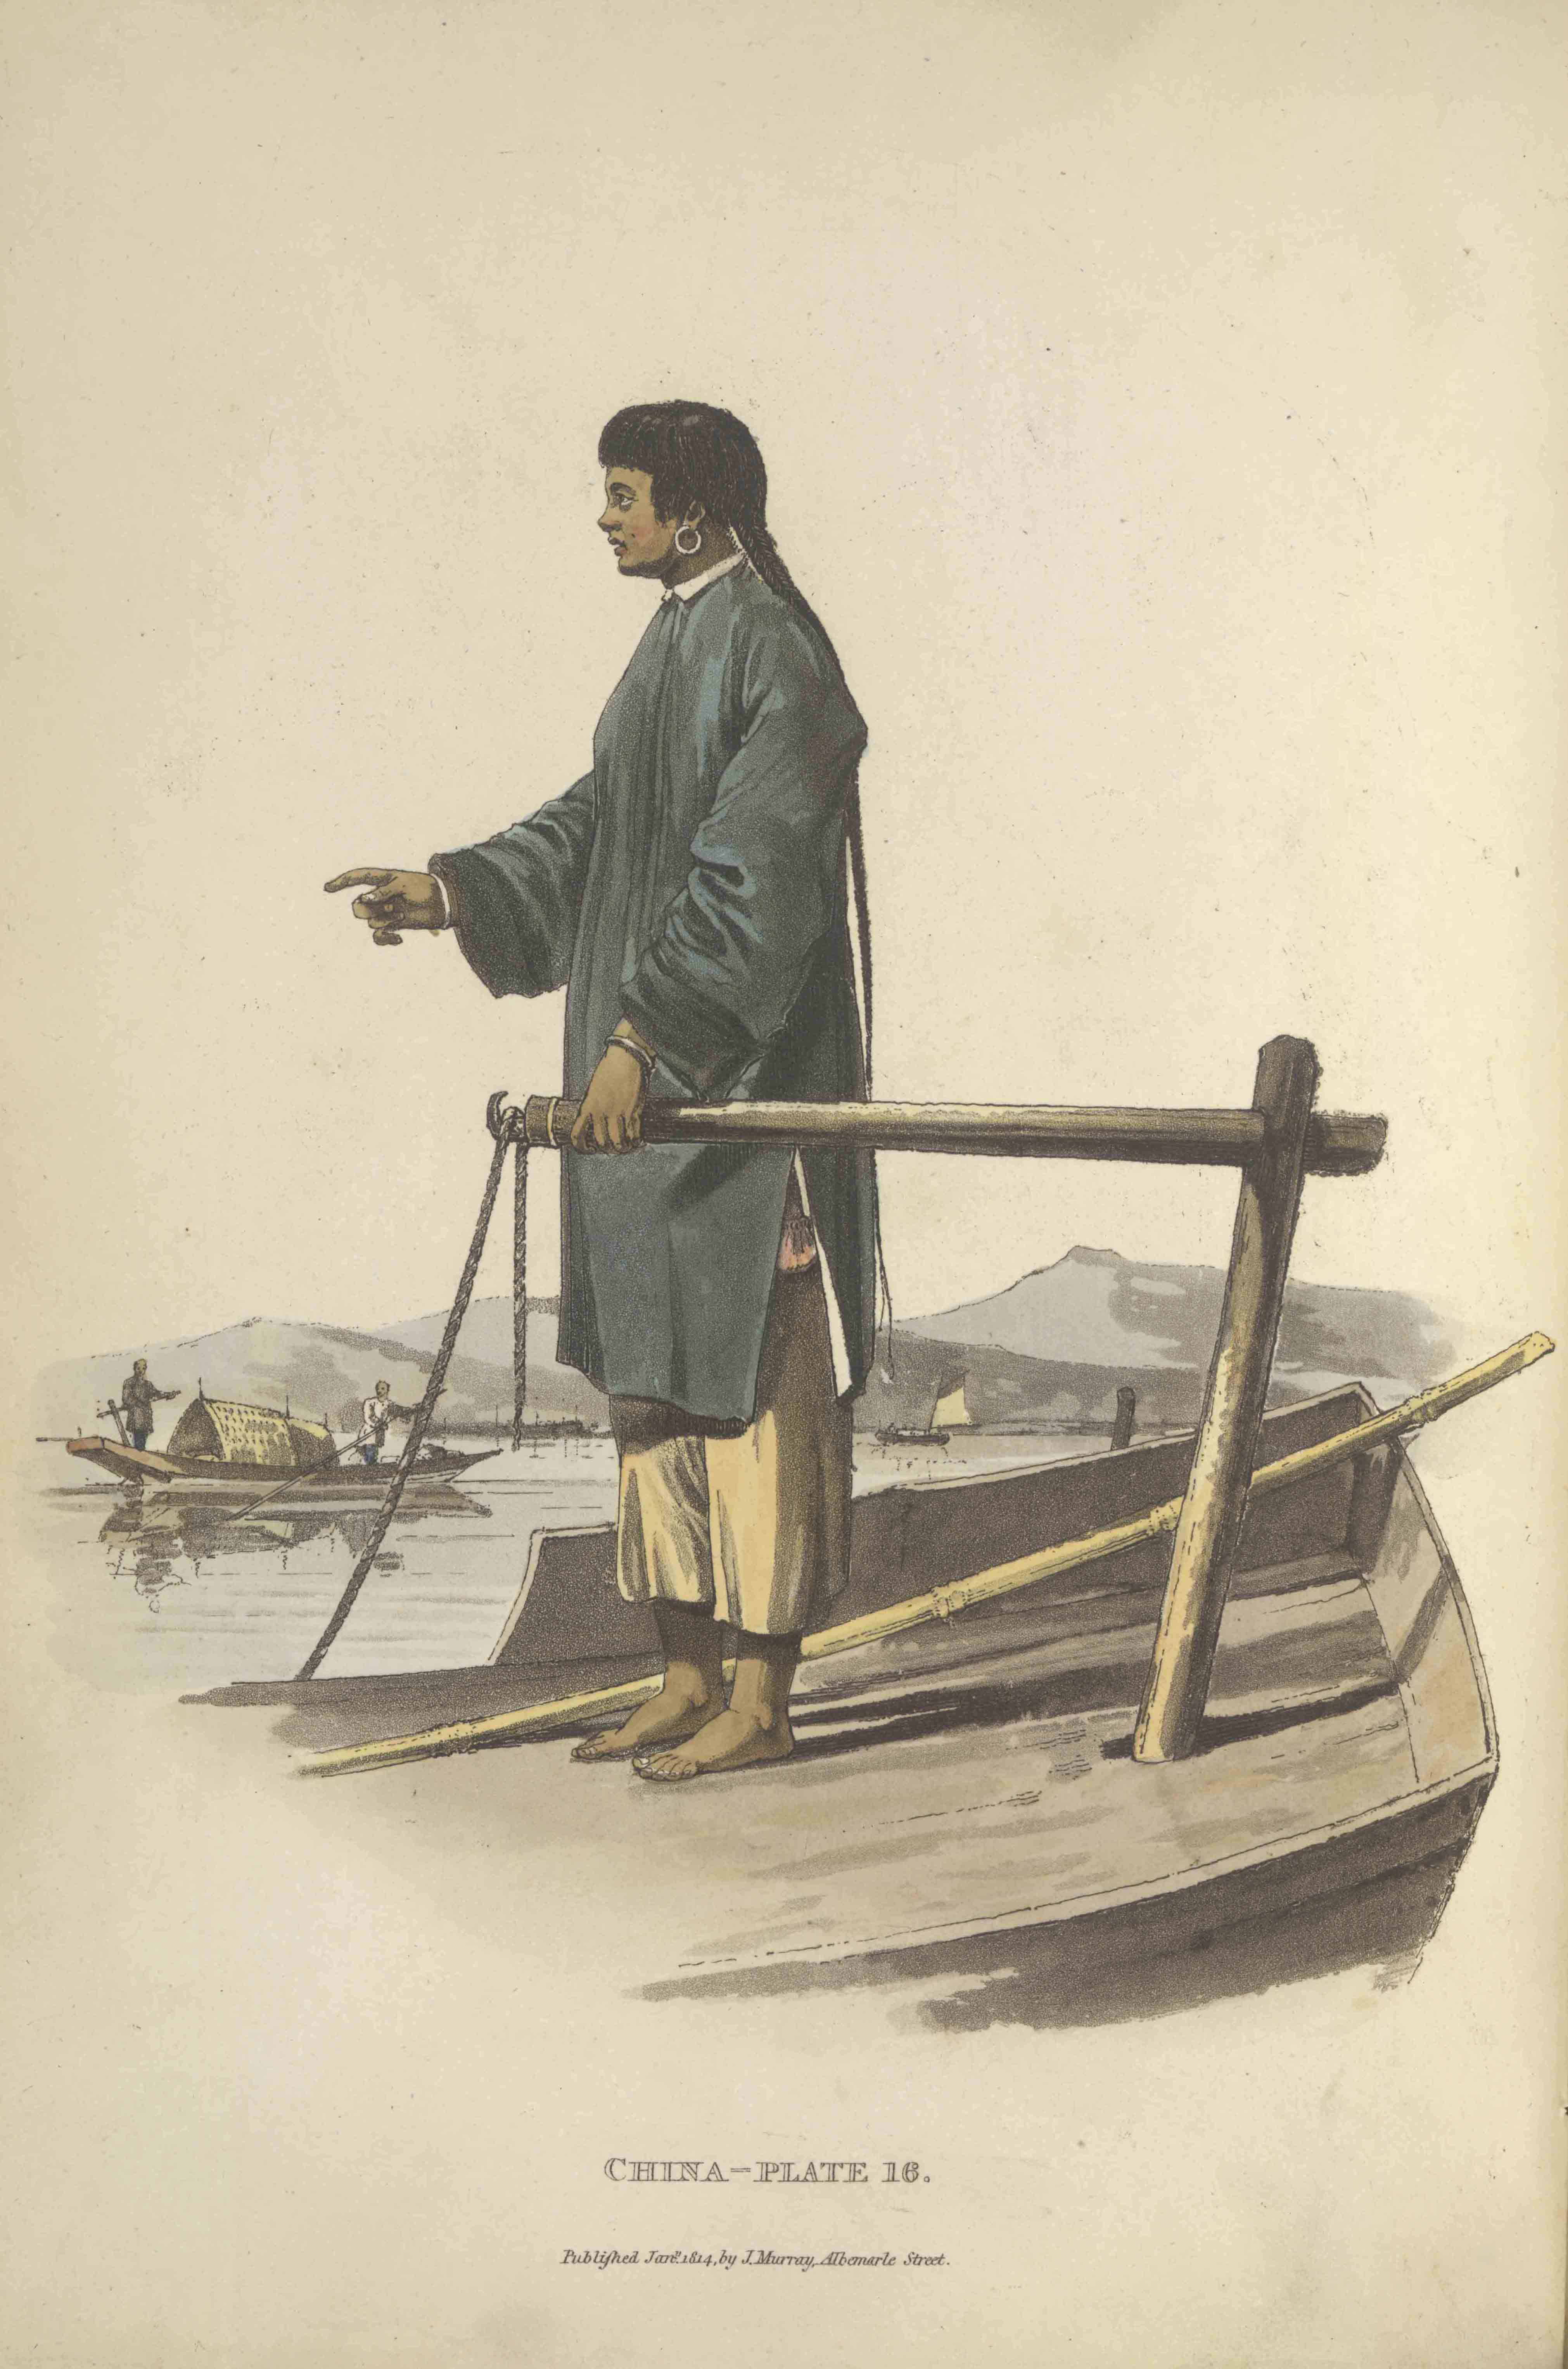 Illustration of a Chinese Boat Girl, China-Plate 36